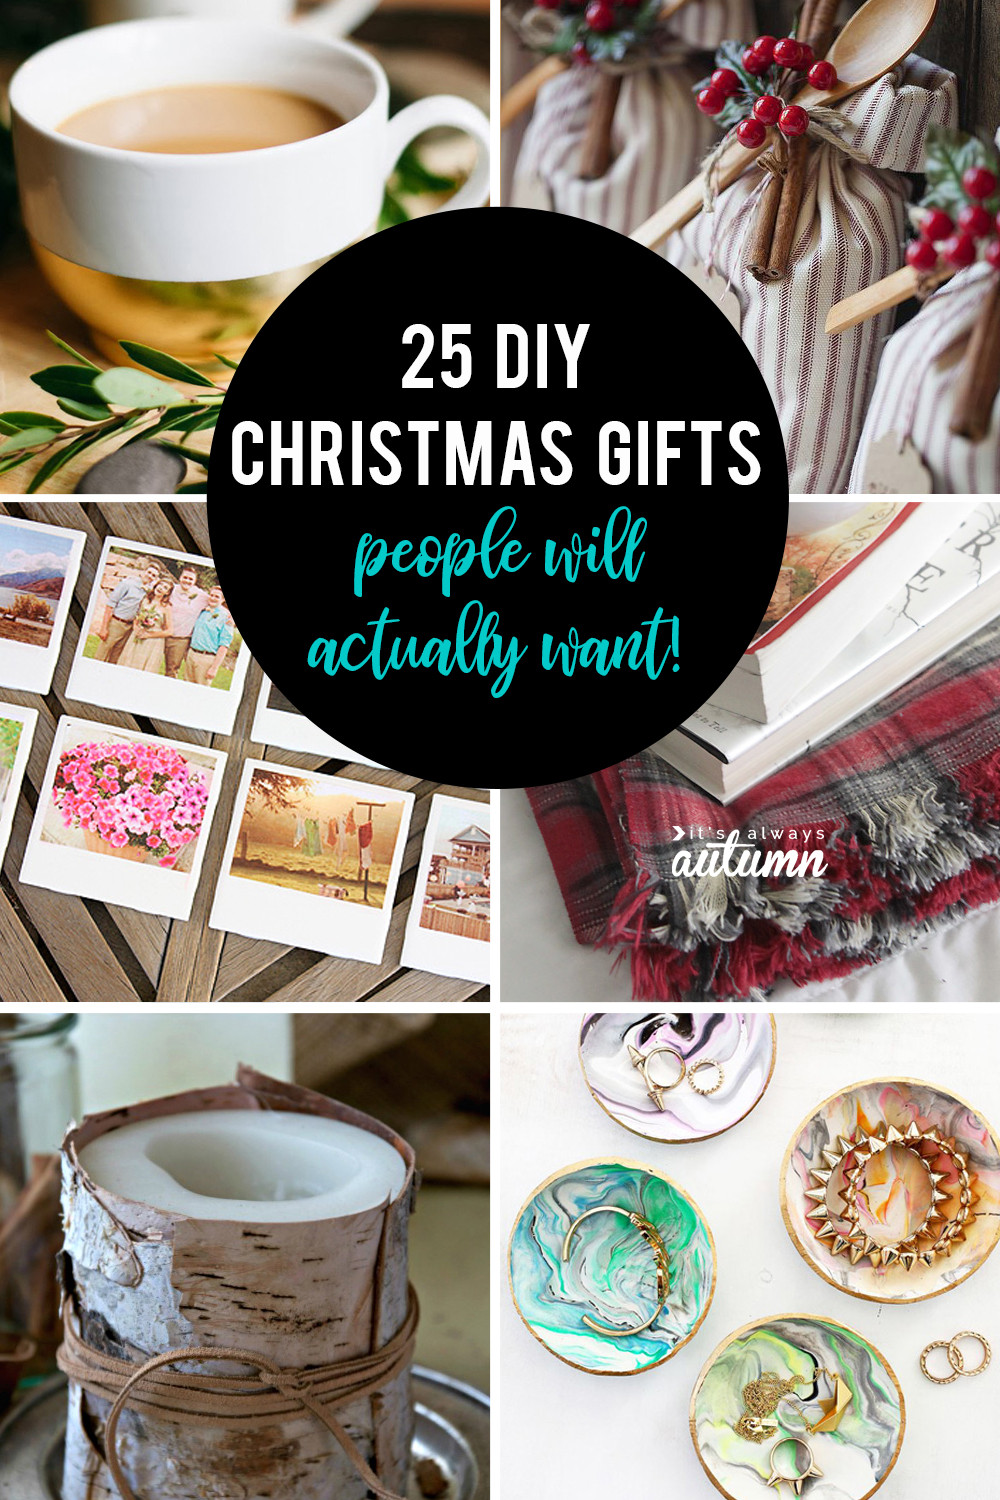 Christmas Gift Ideas On Pinterest
 25 amazing DIY ts people will actually want It s